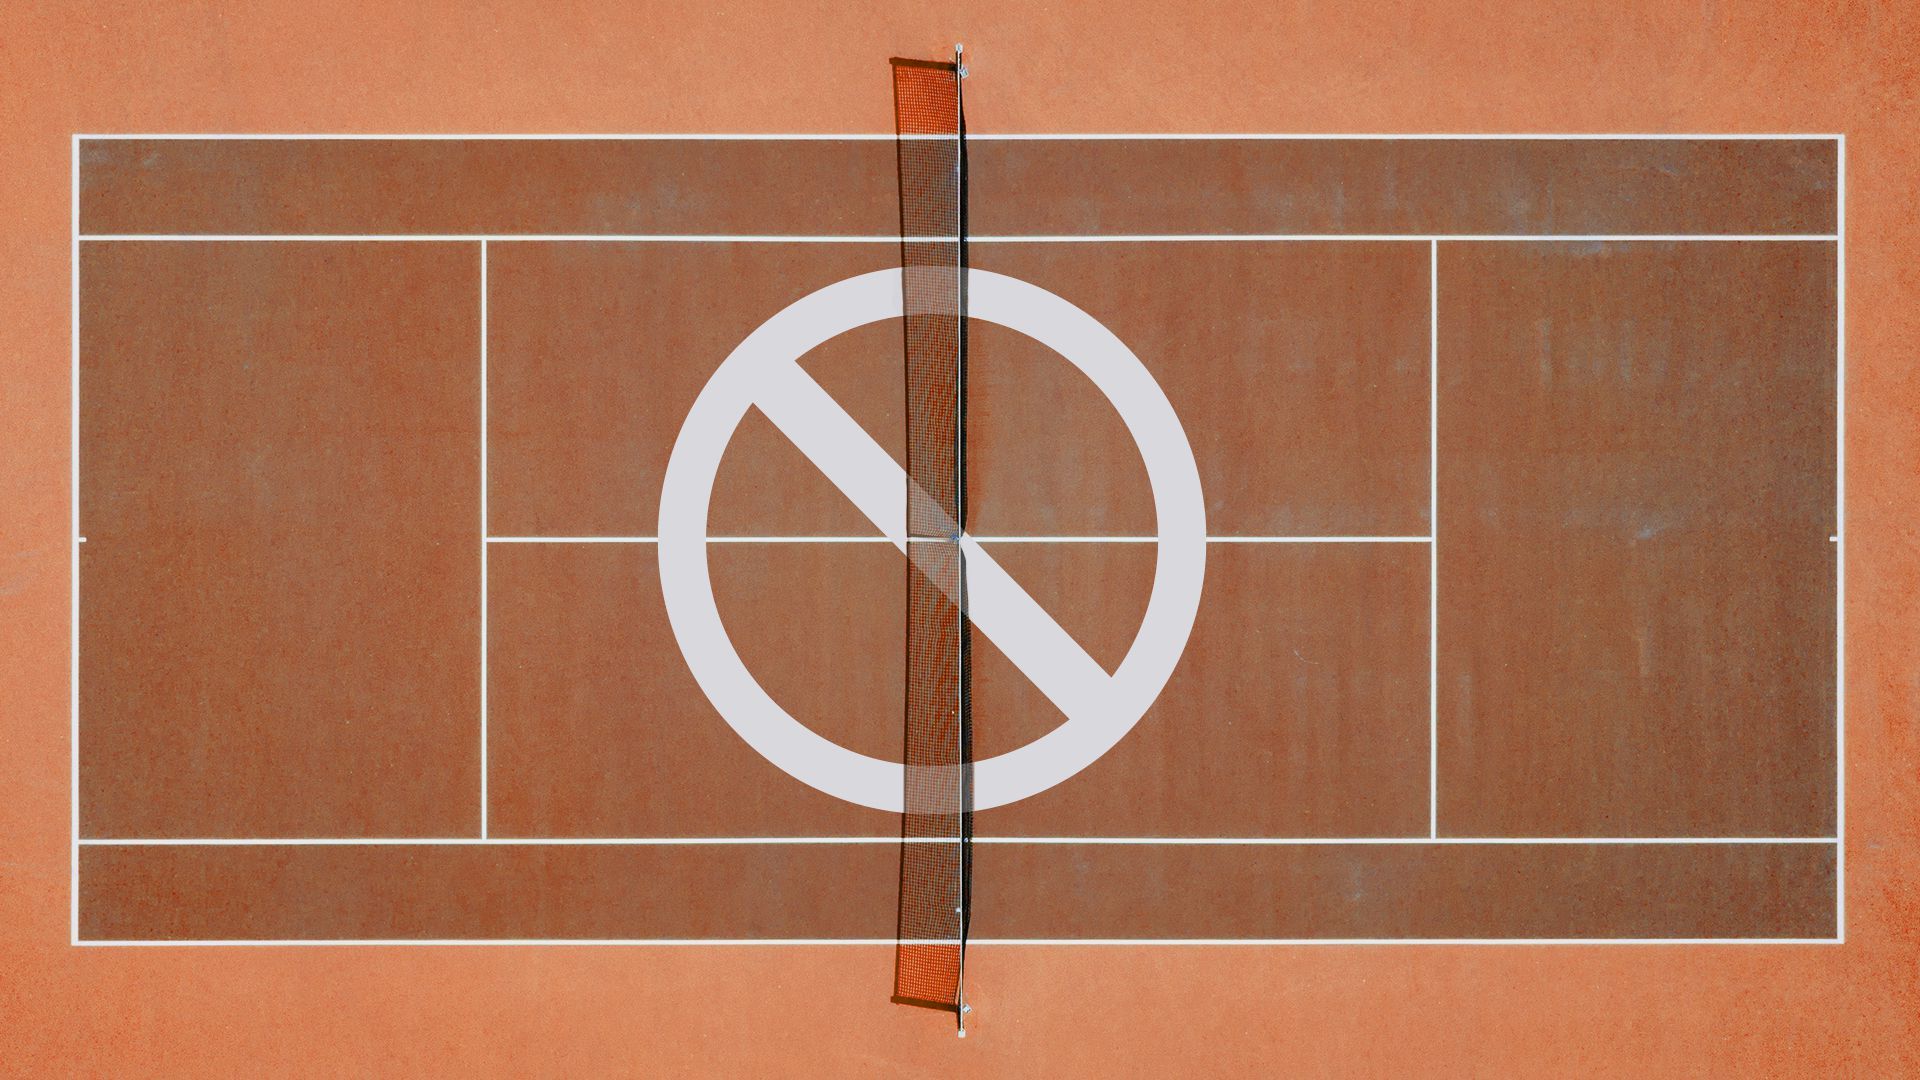 Illustration of a tennis court with a 